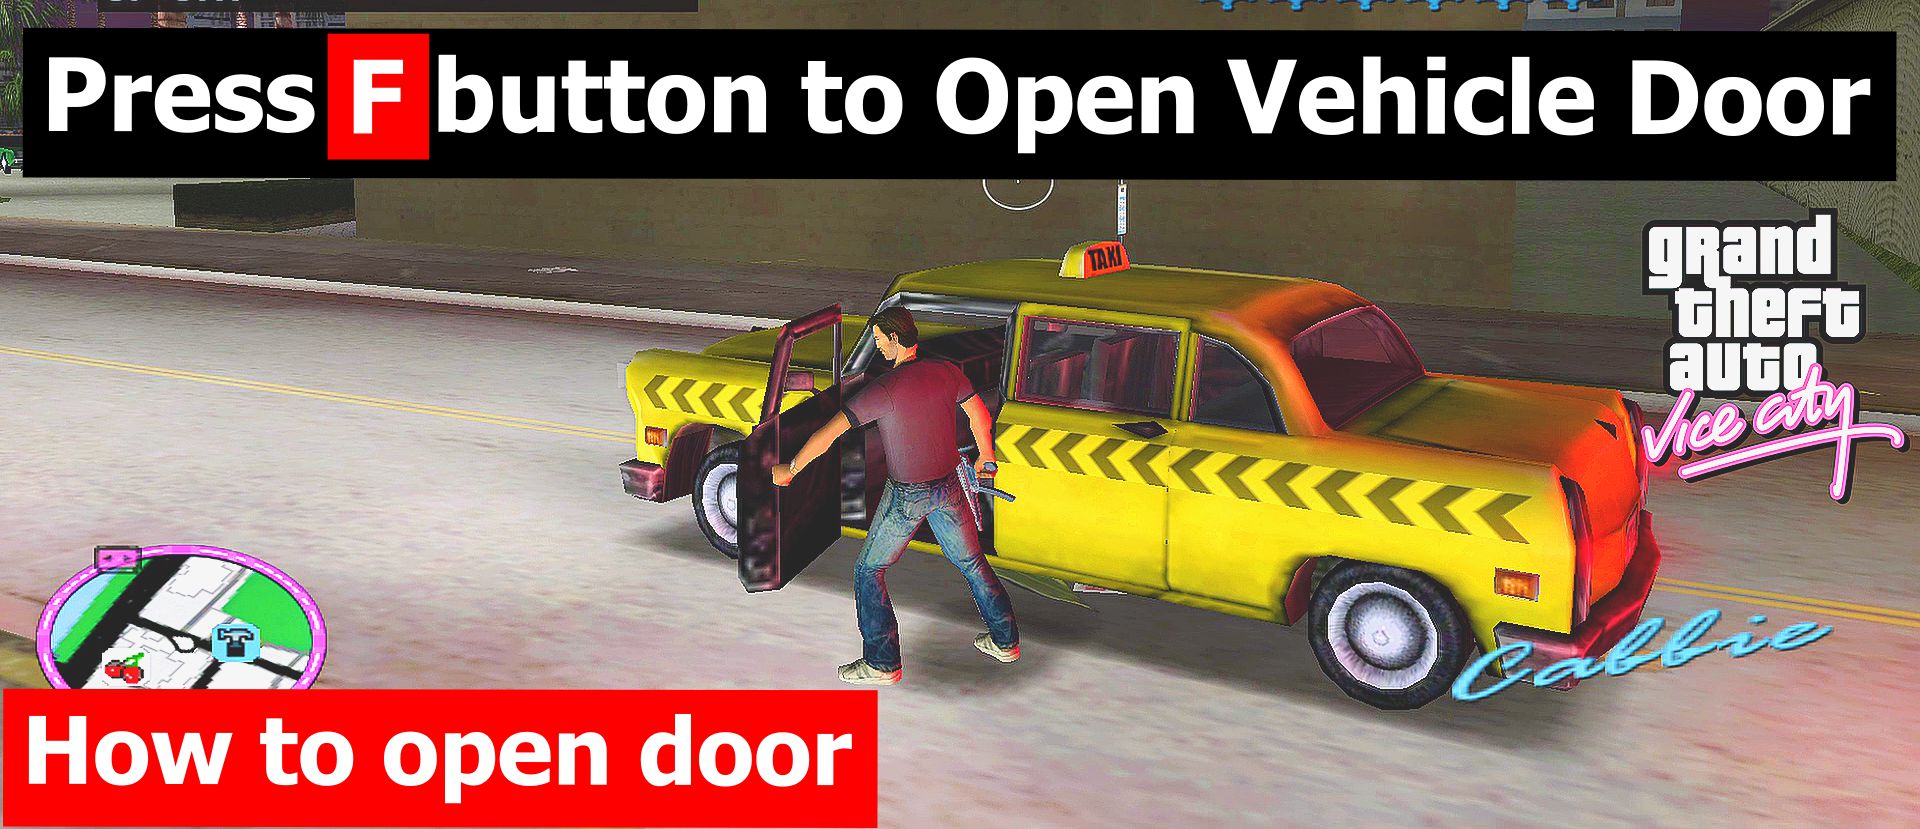 How to open vehicle gate in GTA vice city PC game